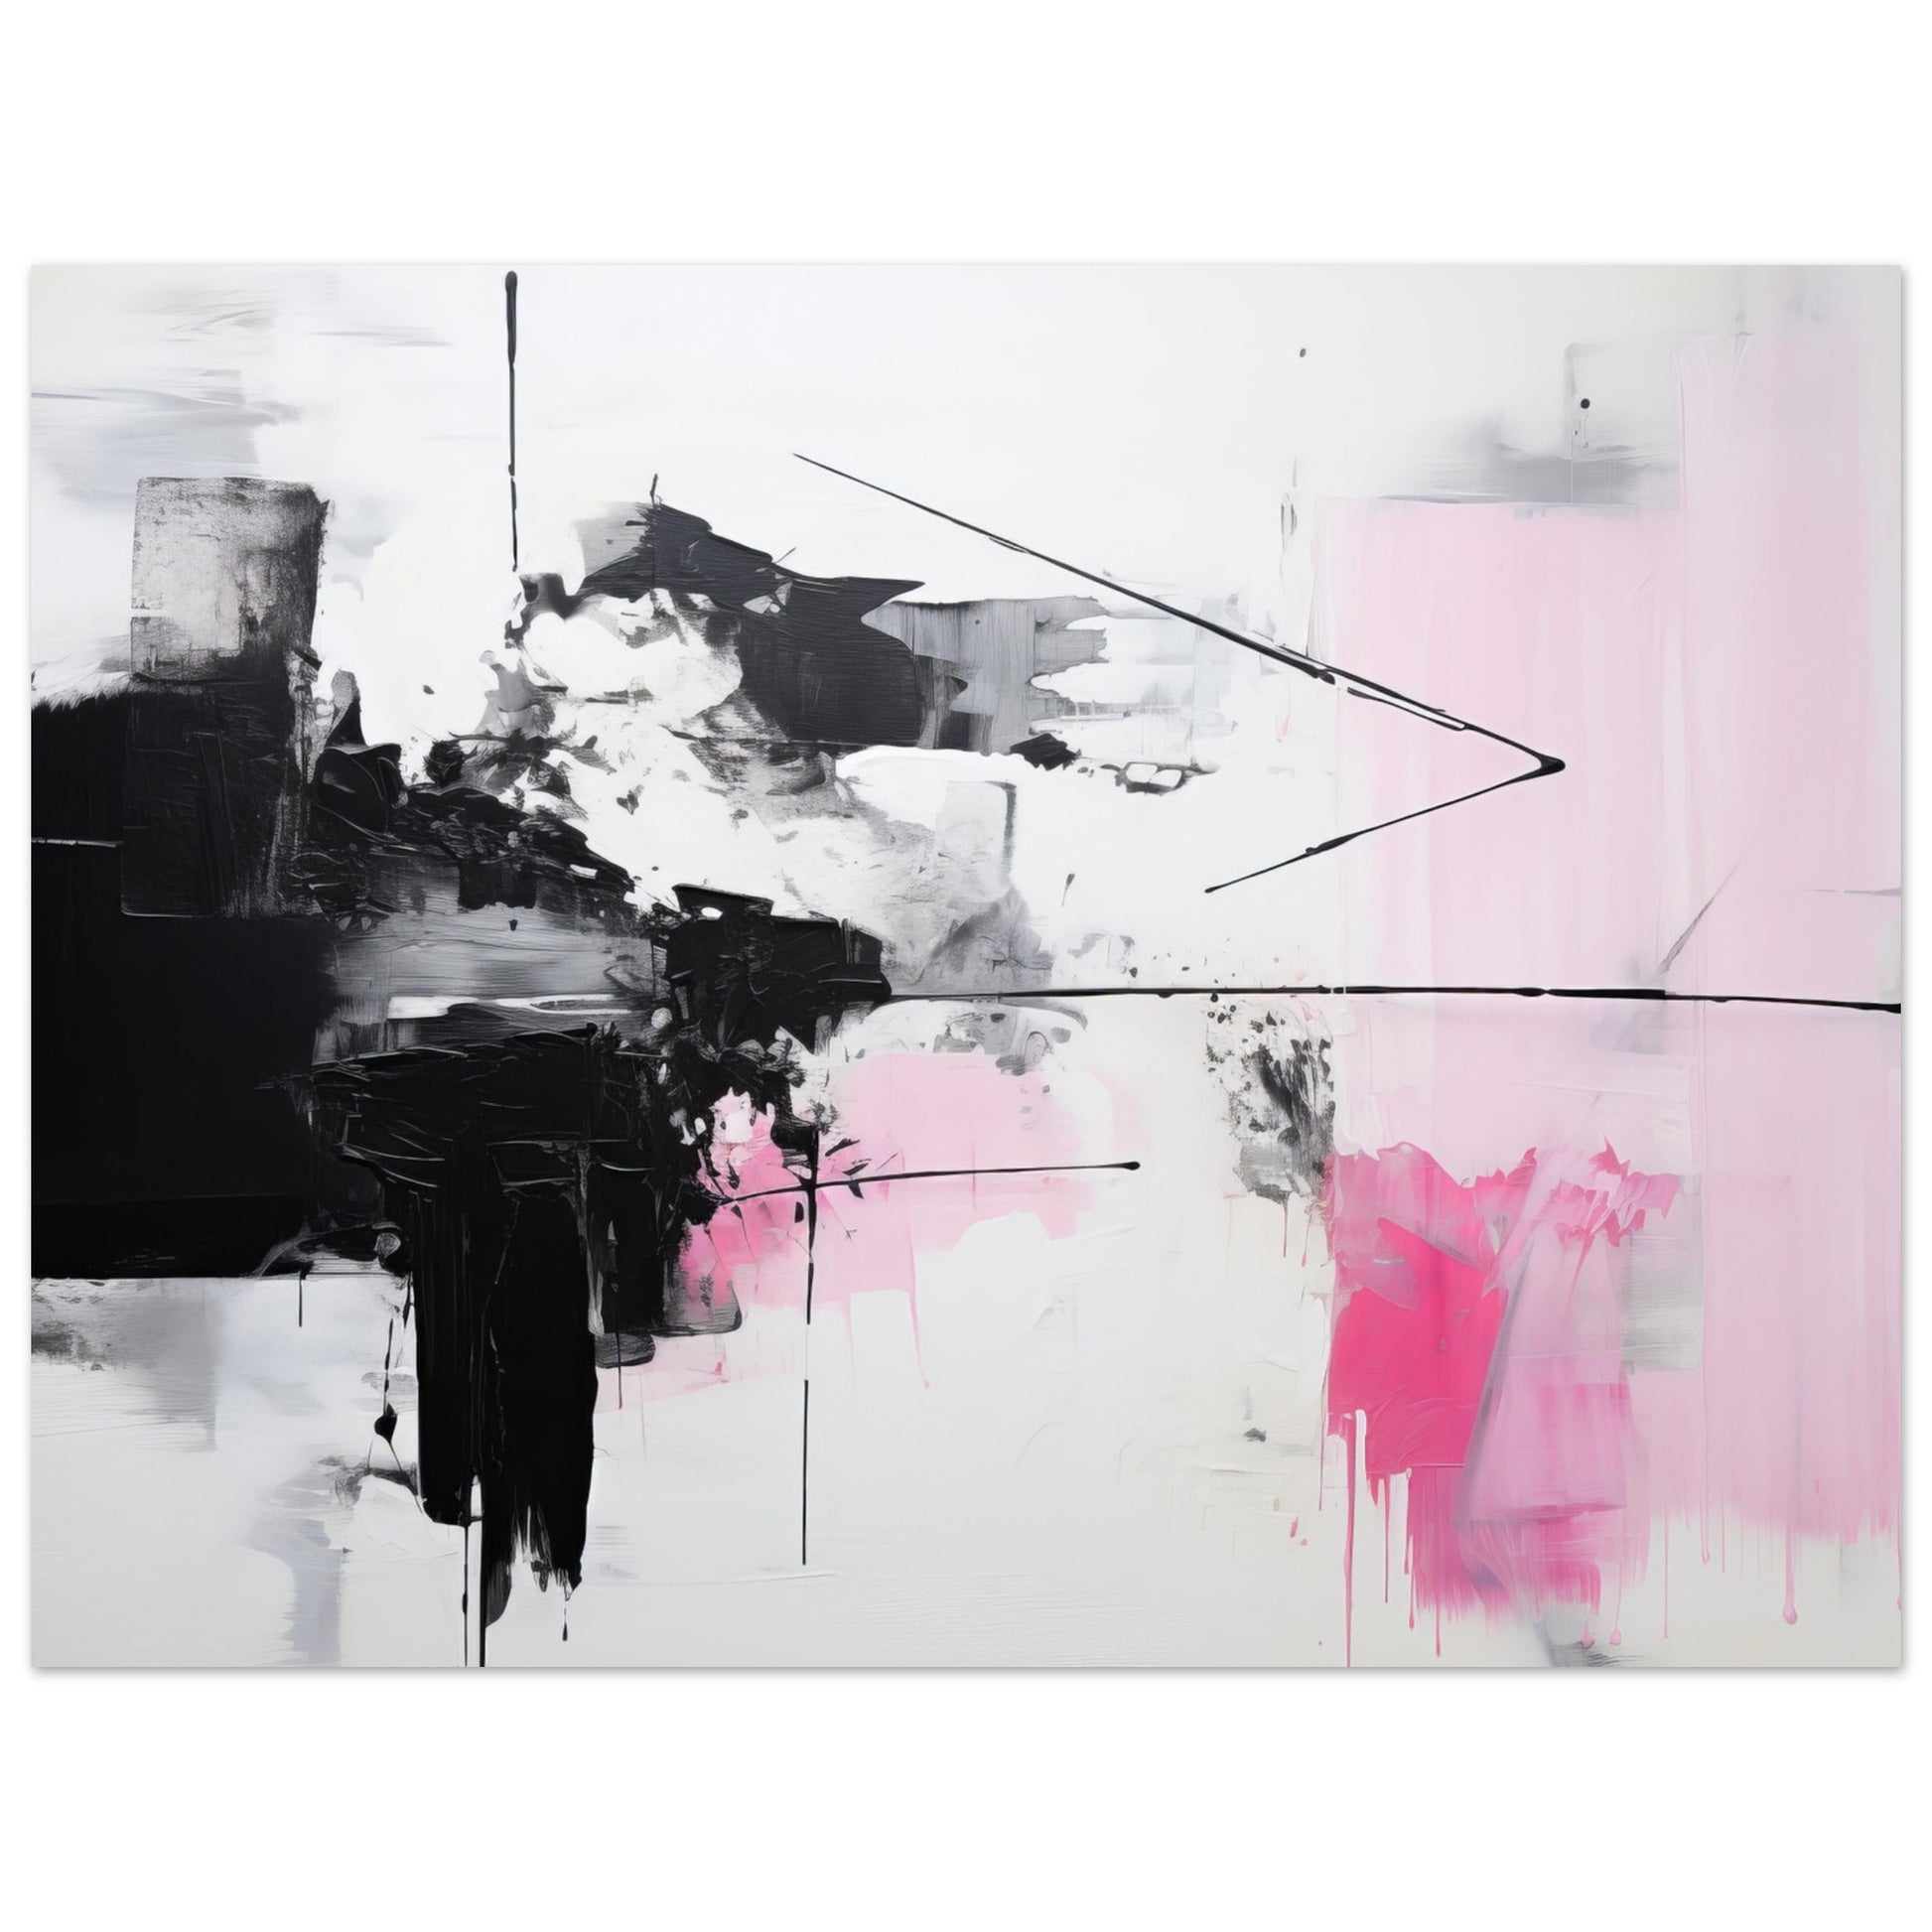 A contemporary abstract wall art titled "Ohne Titel" showcasing a mix of black and white patterns with striking pink accents. The painting portrays a blend of solid shapes, brush strokes, and drips, reflecting the myriad of emotions and experiences.